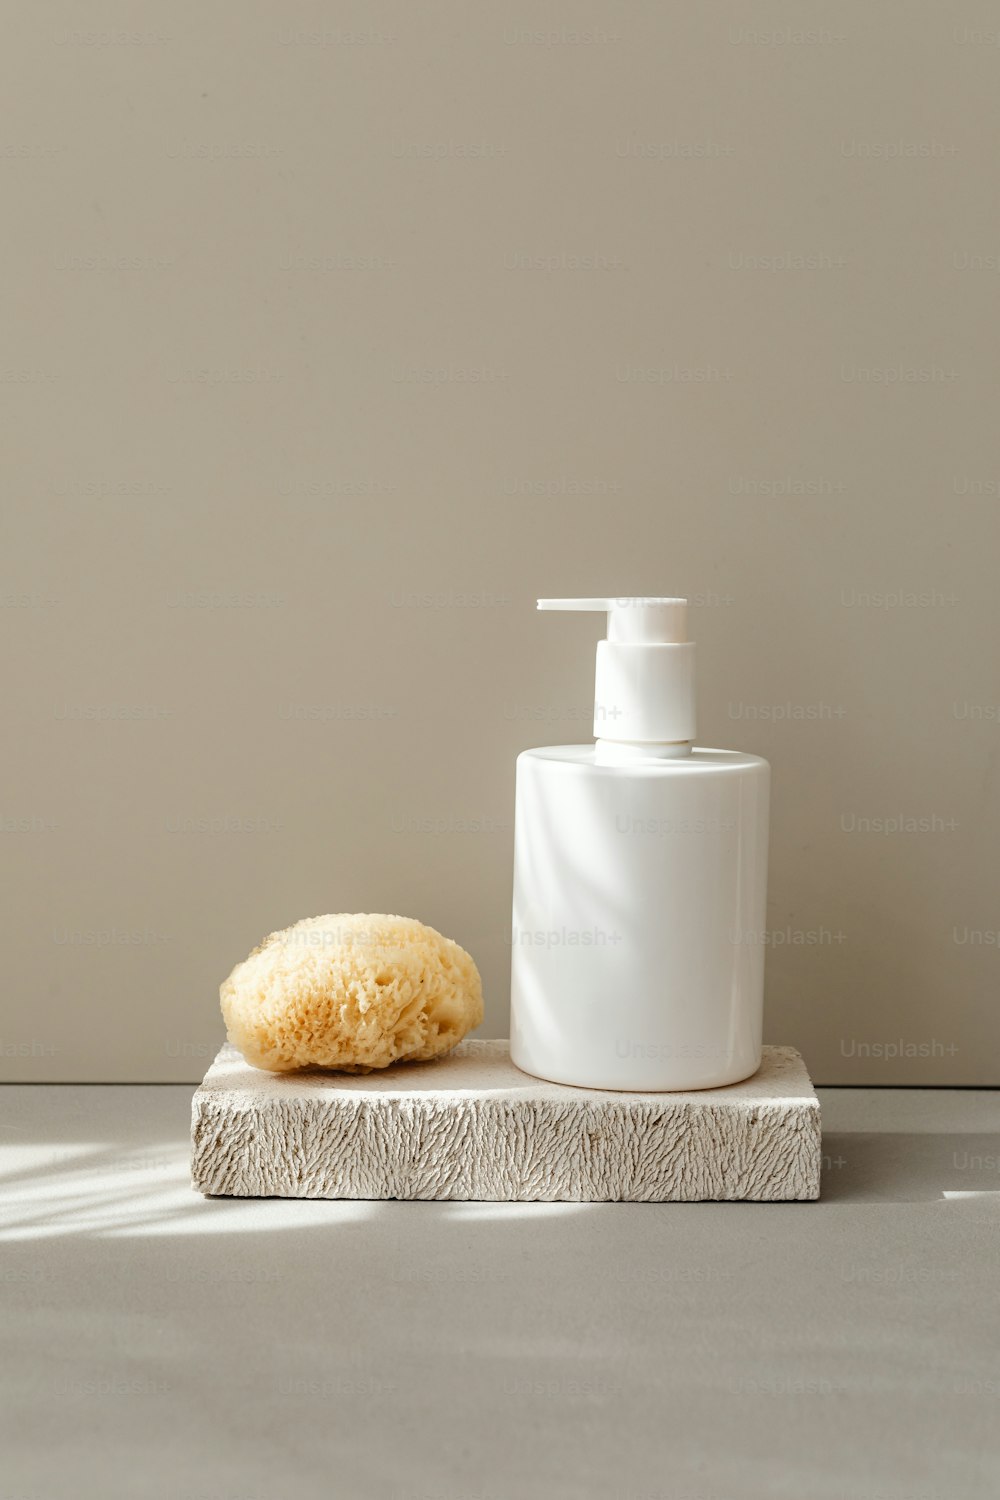 a soap dispenser and sponge on a stone slab